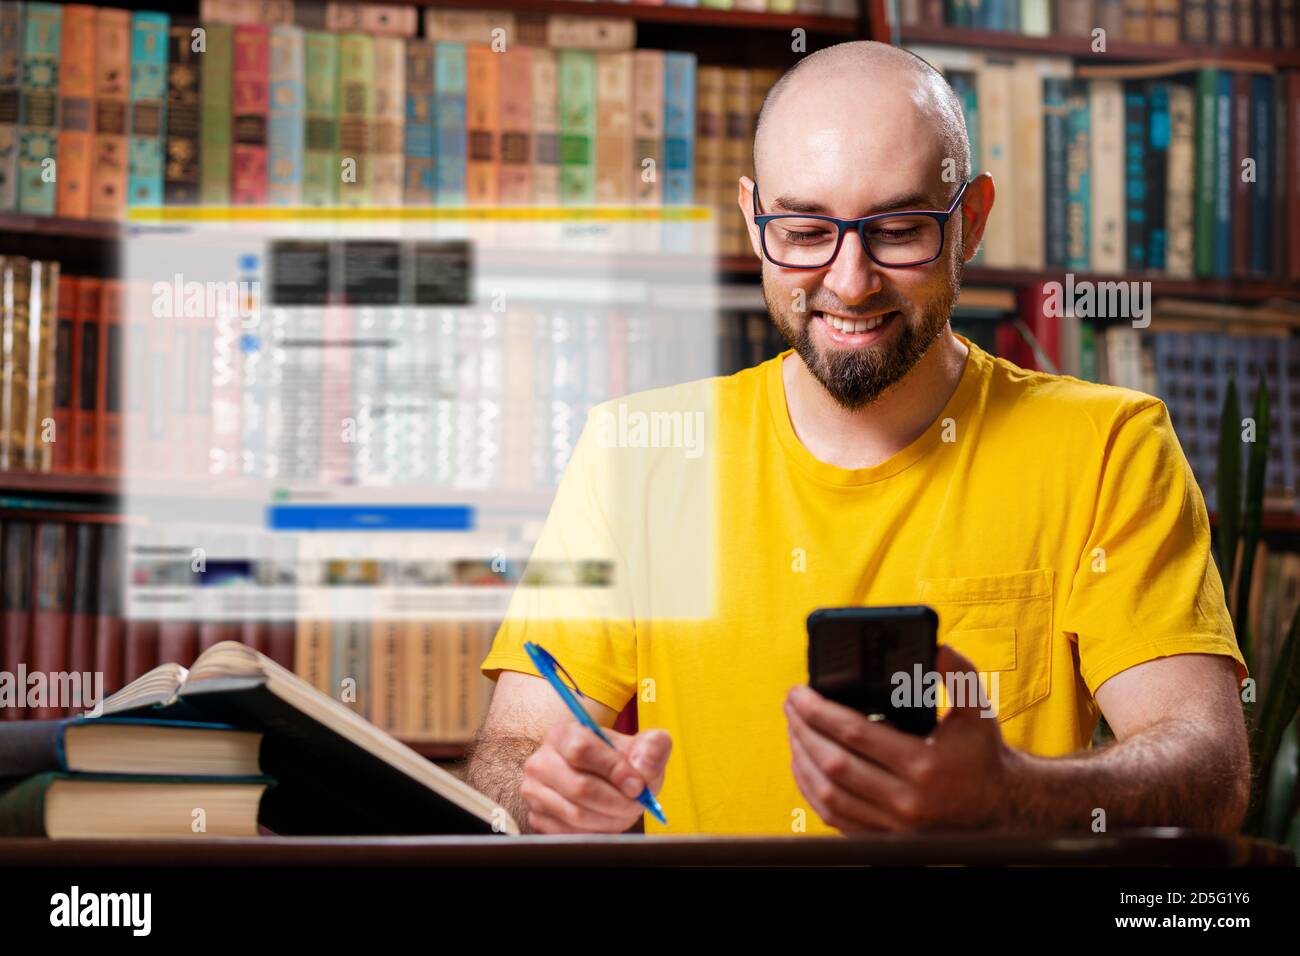 A bearded bald man with glasses and a smile uses a smartphone. Digital transparent window above the phone.In the background-shelves with books. The co Stock Photo